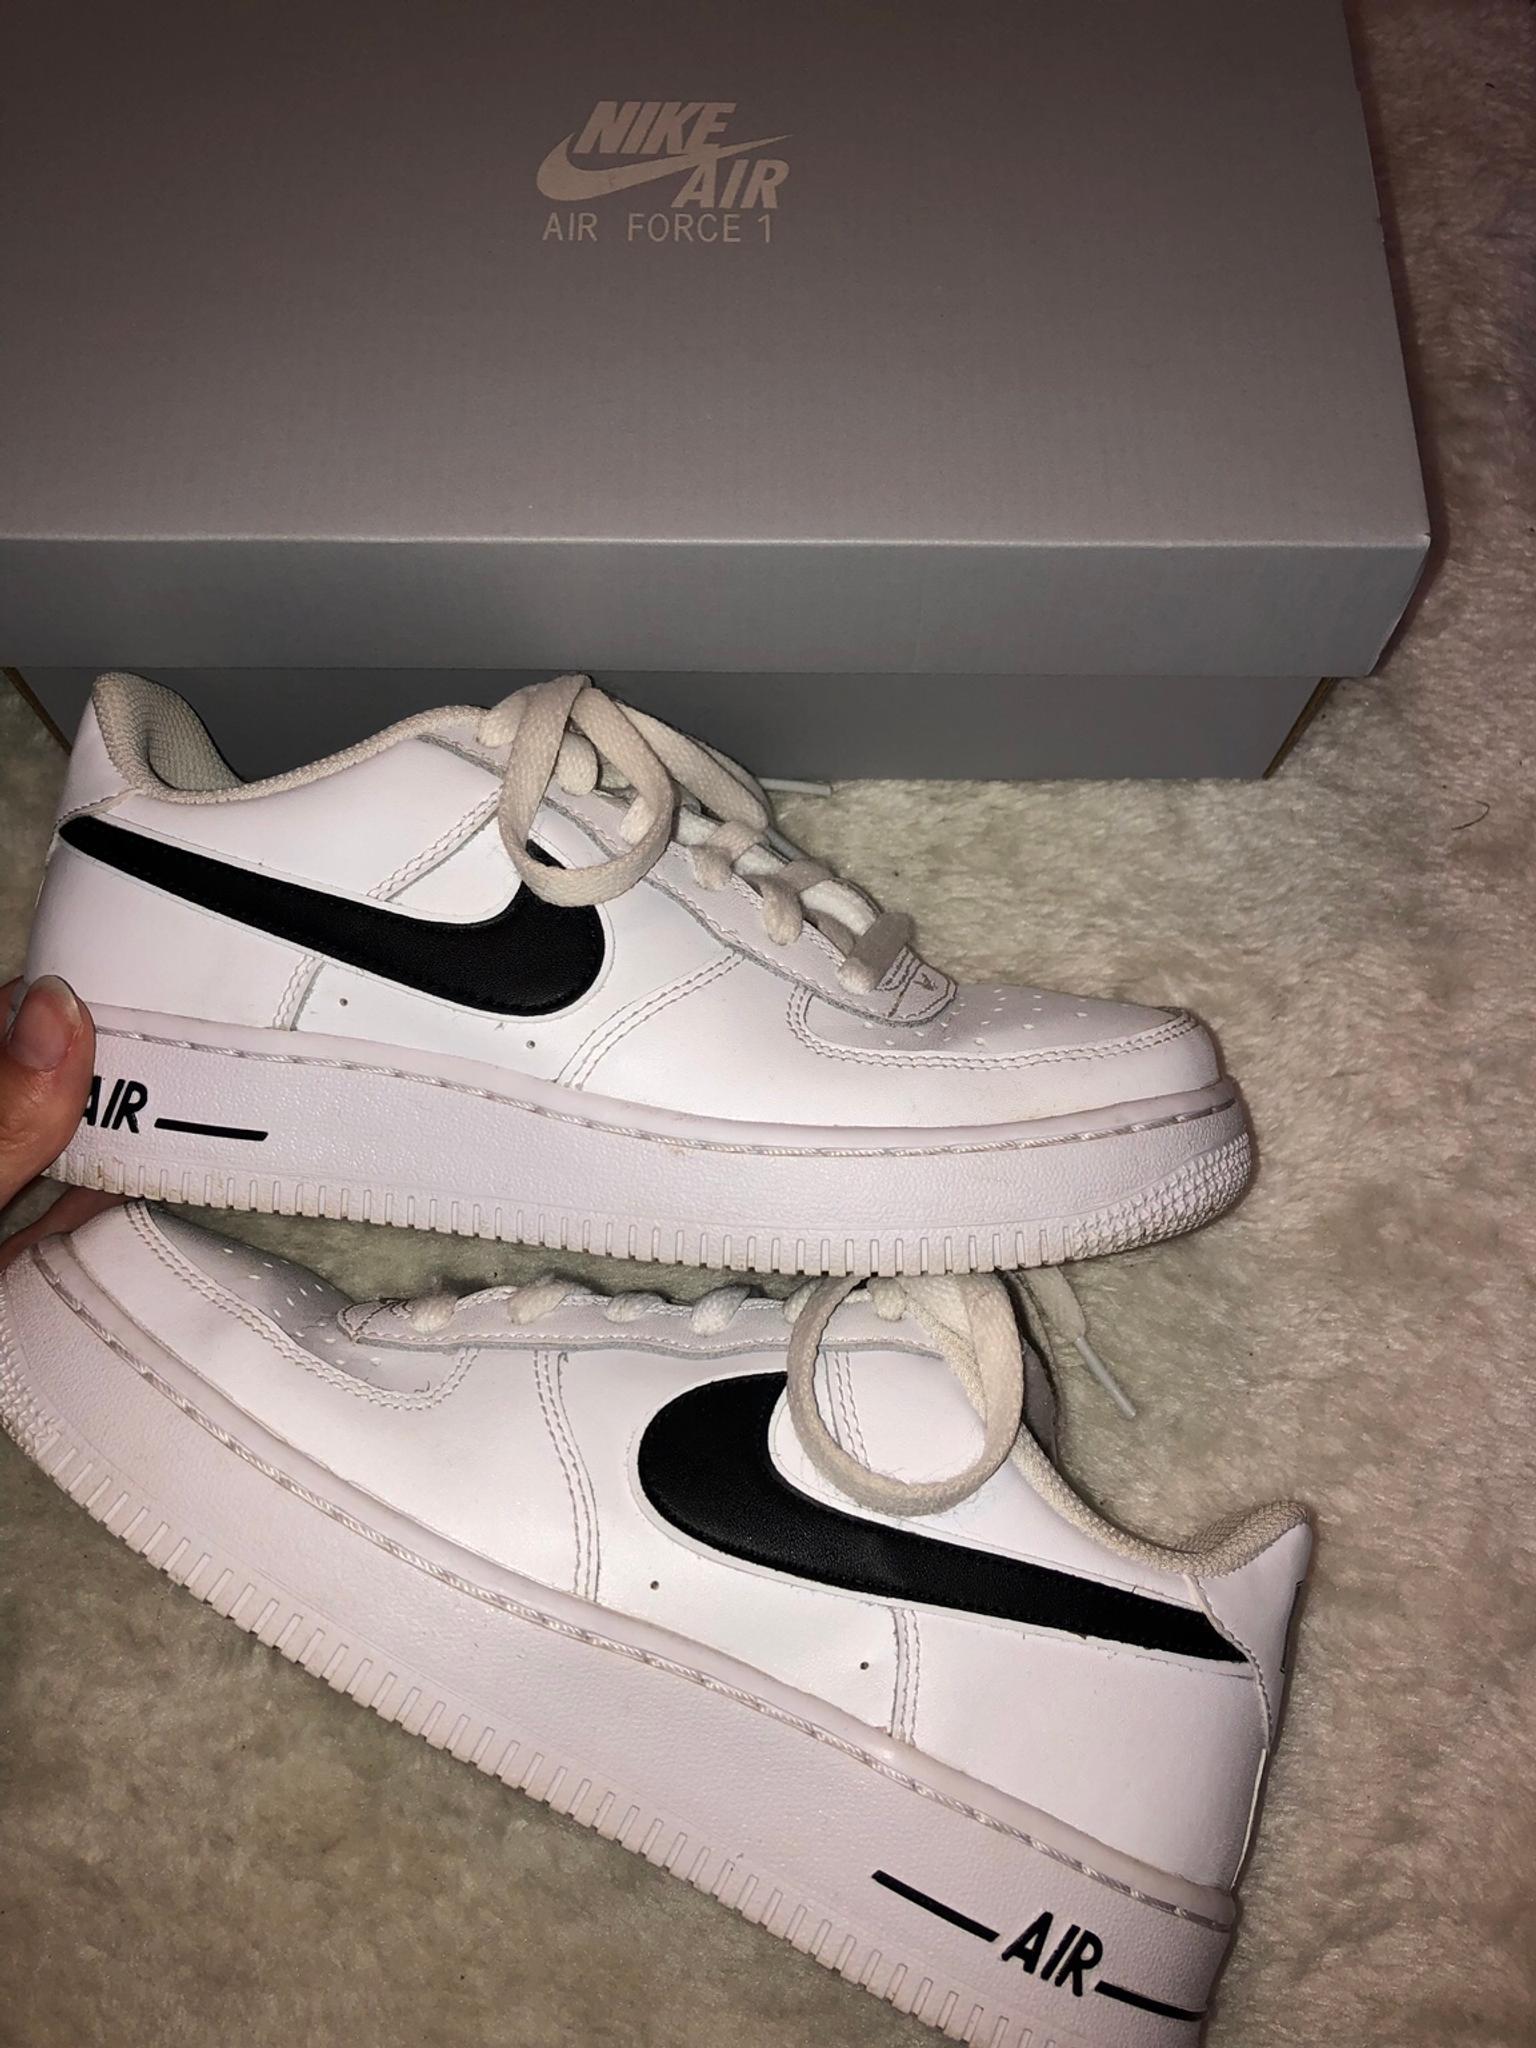 Nike Air Force One, Gr.37,5 in 36456 Barchfeld-Immelborn for €75.00 for  sale | Shpock